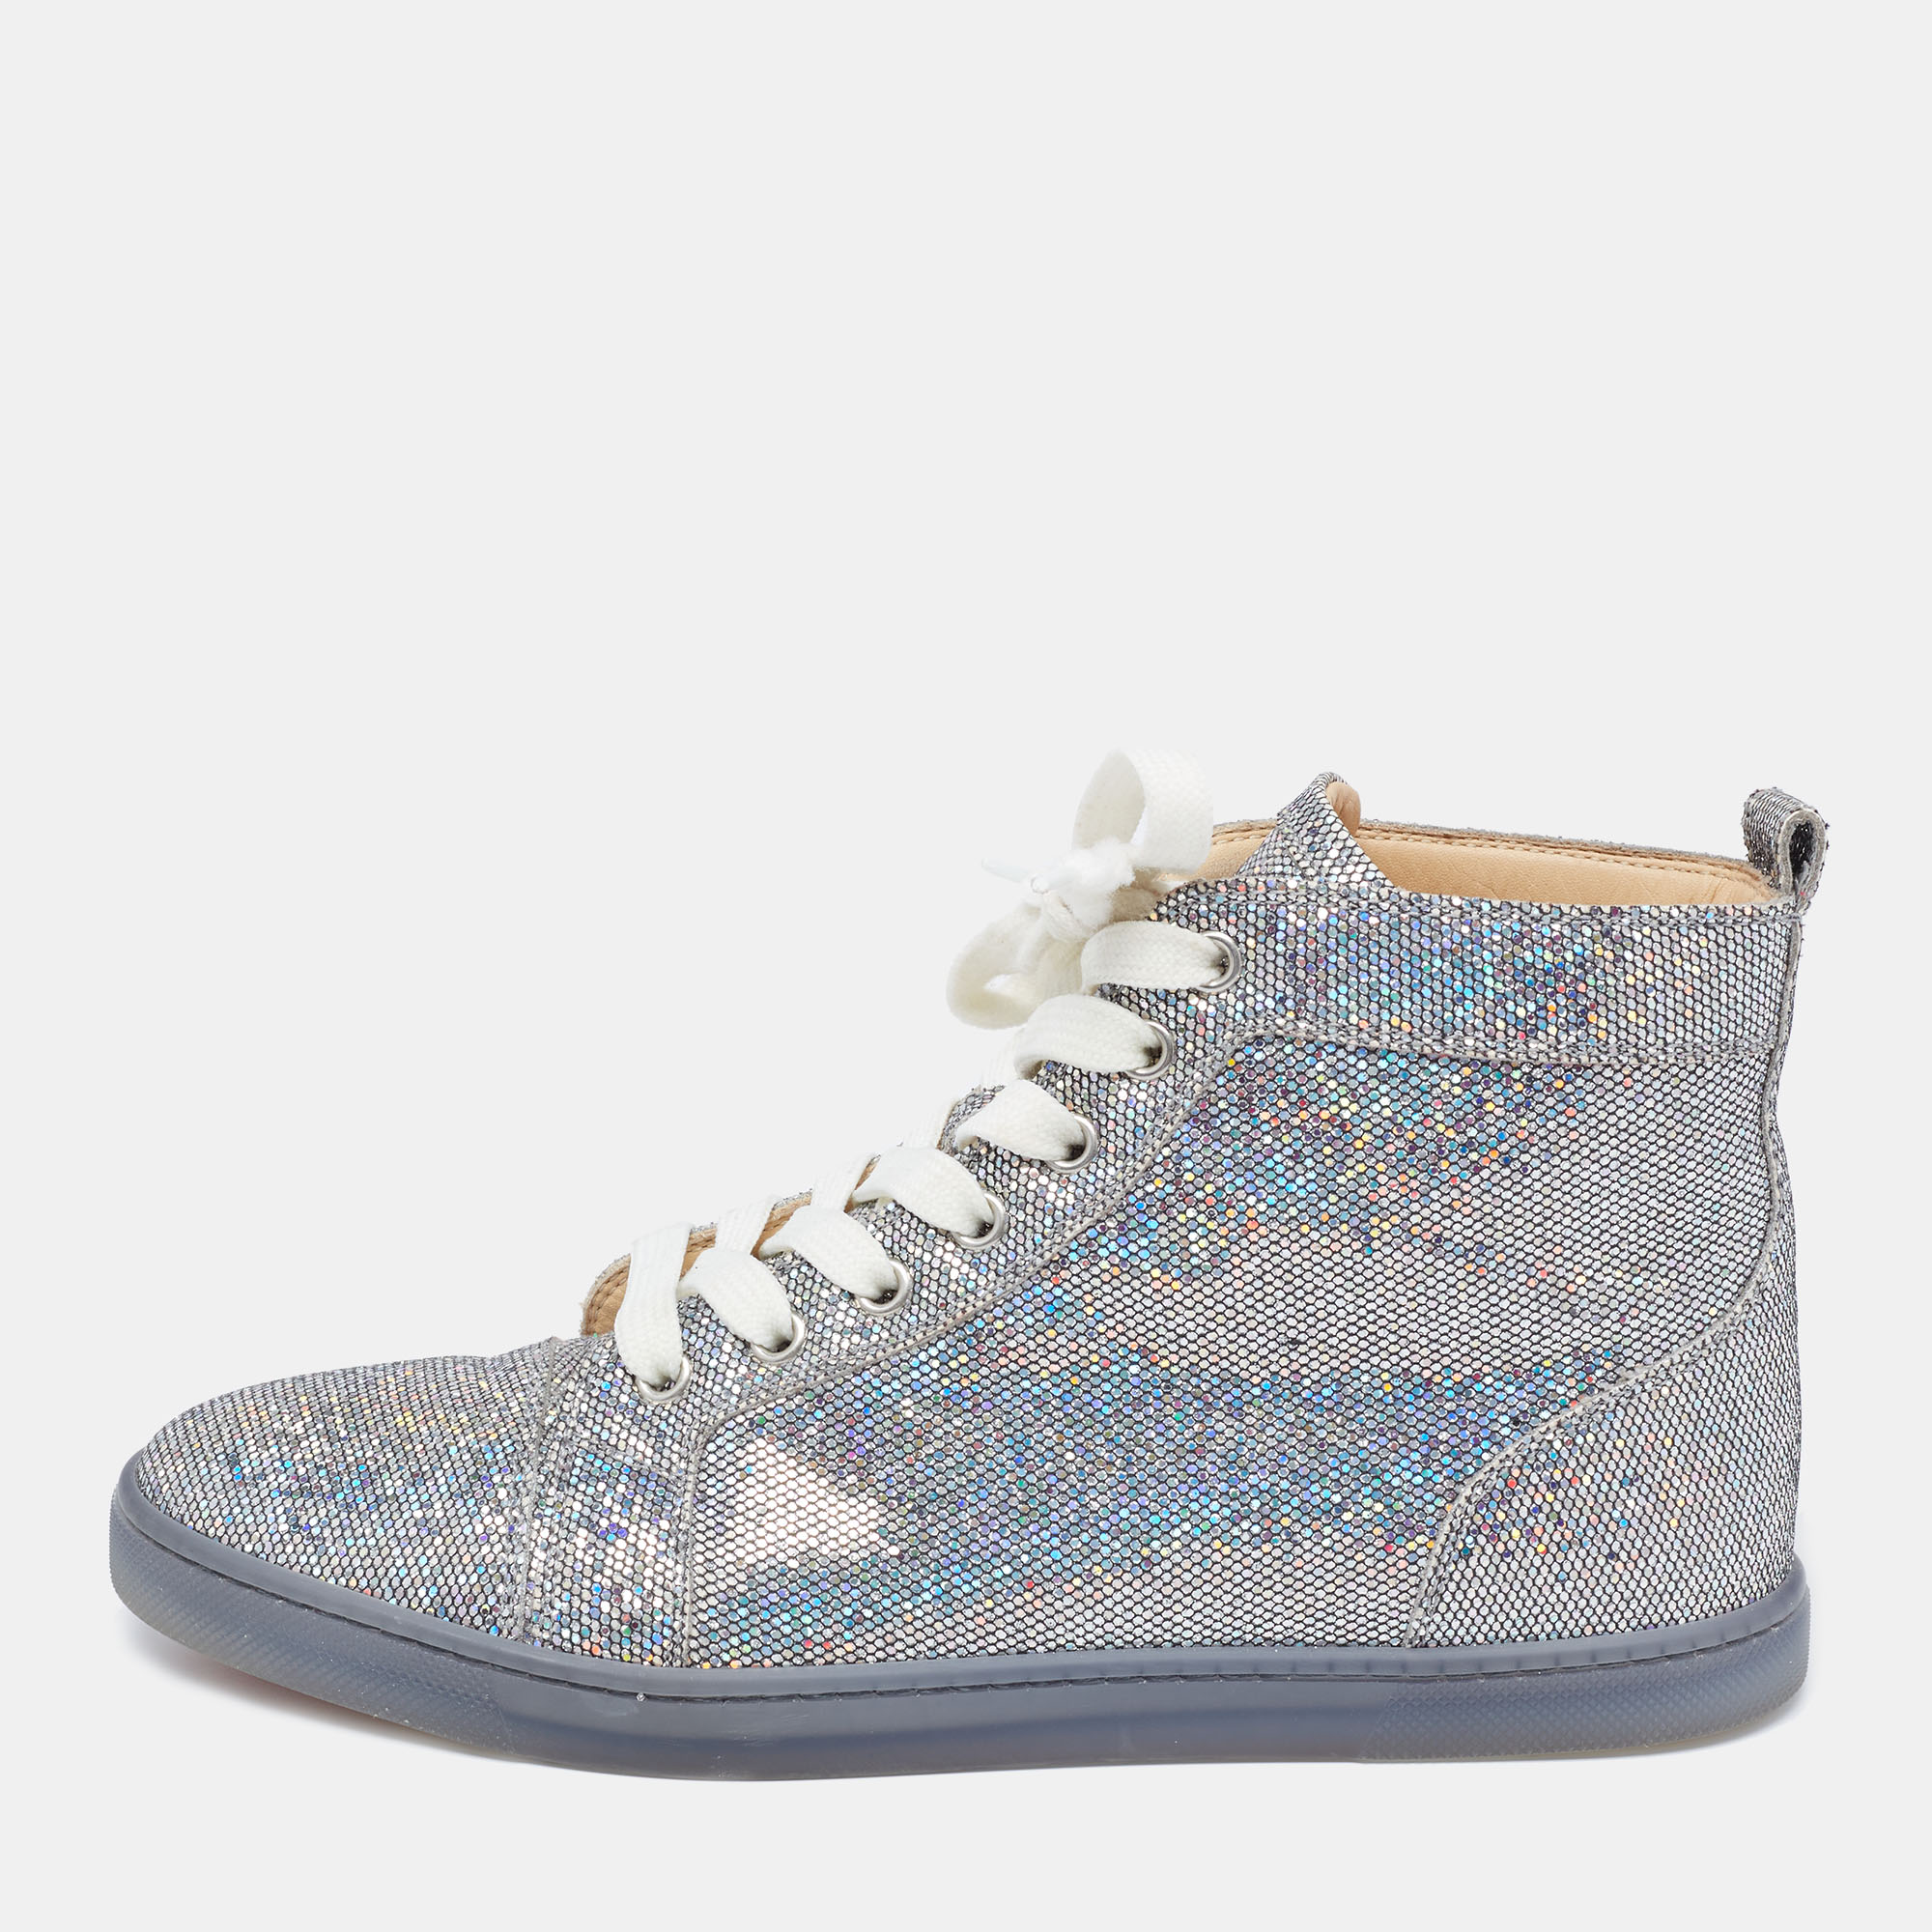 Pre-owned Christian Louboutin Silver Glitter Disco Ball Rantus Orlato High Top Sneakers Size 38.5